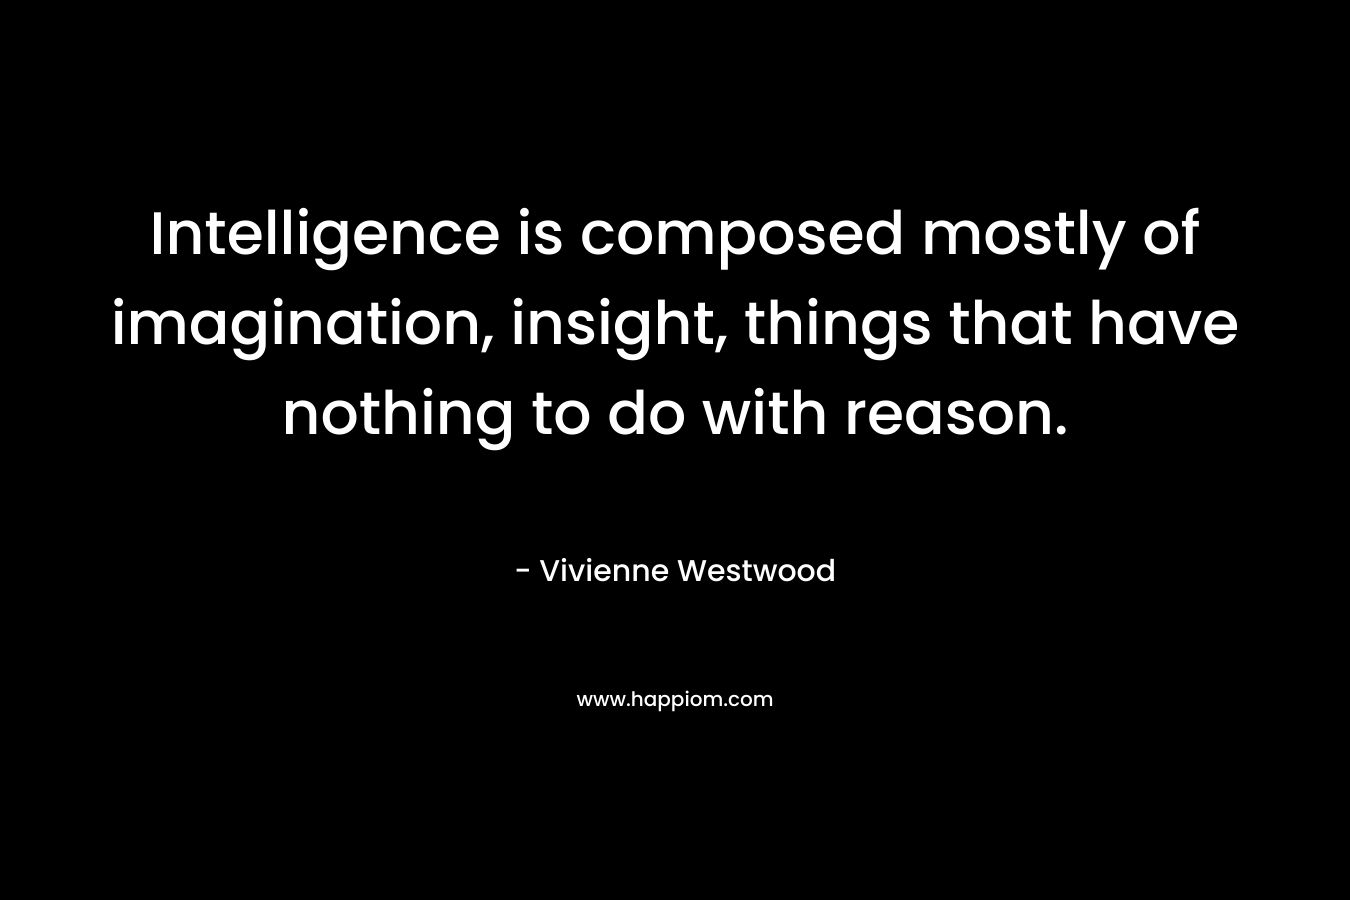 Intelligence is composed mostly of imagination, insight, things that have nothing to do with reason.